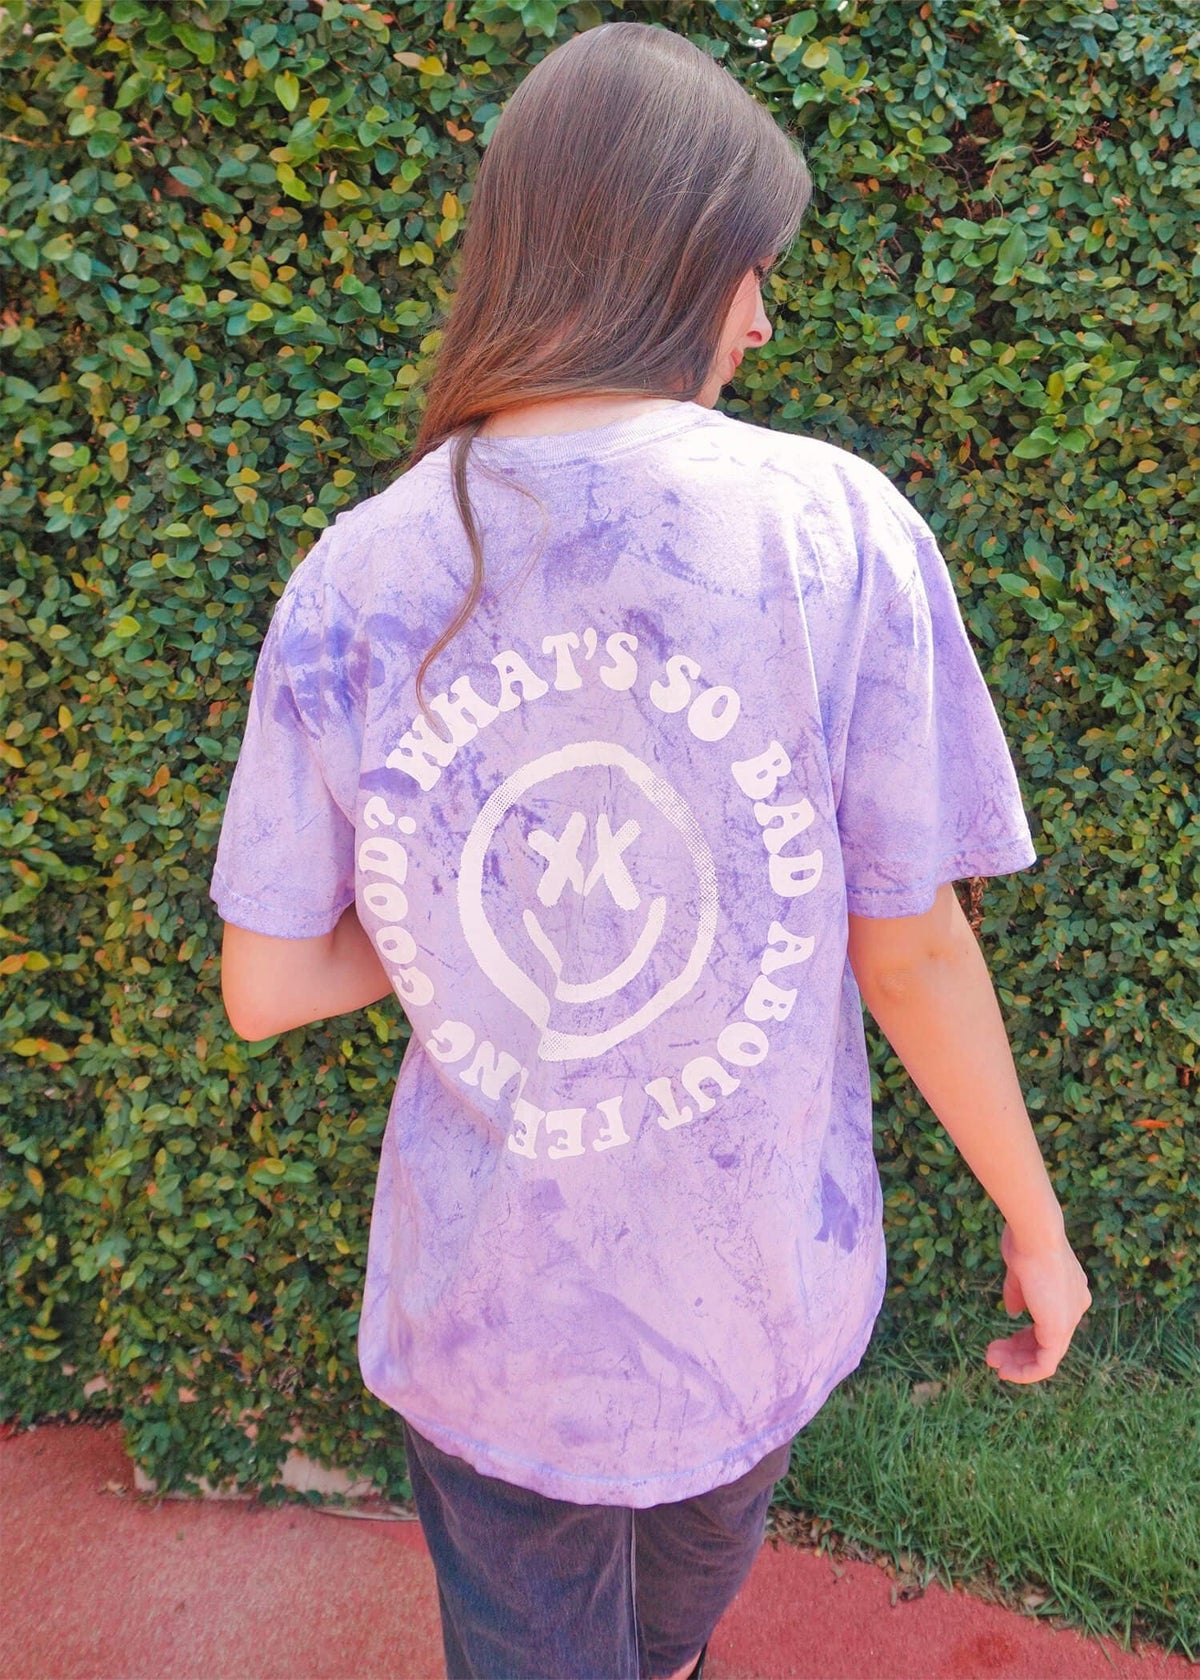 What's So Bad About Feelin' Good Tee - Purple TieDye T-Shirt MerciGrace Boutique.